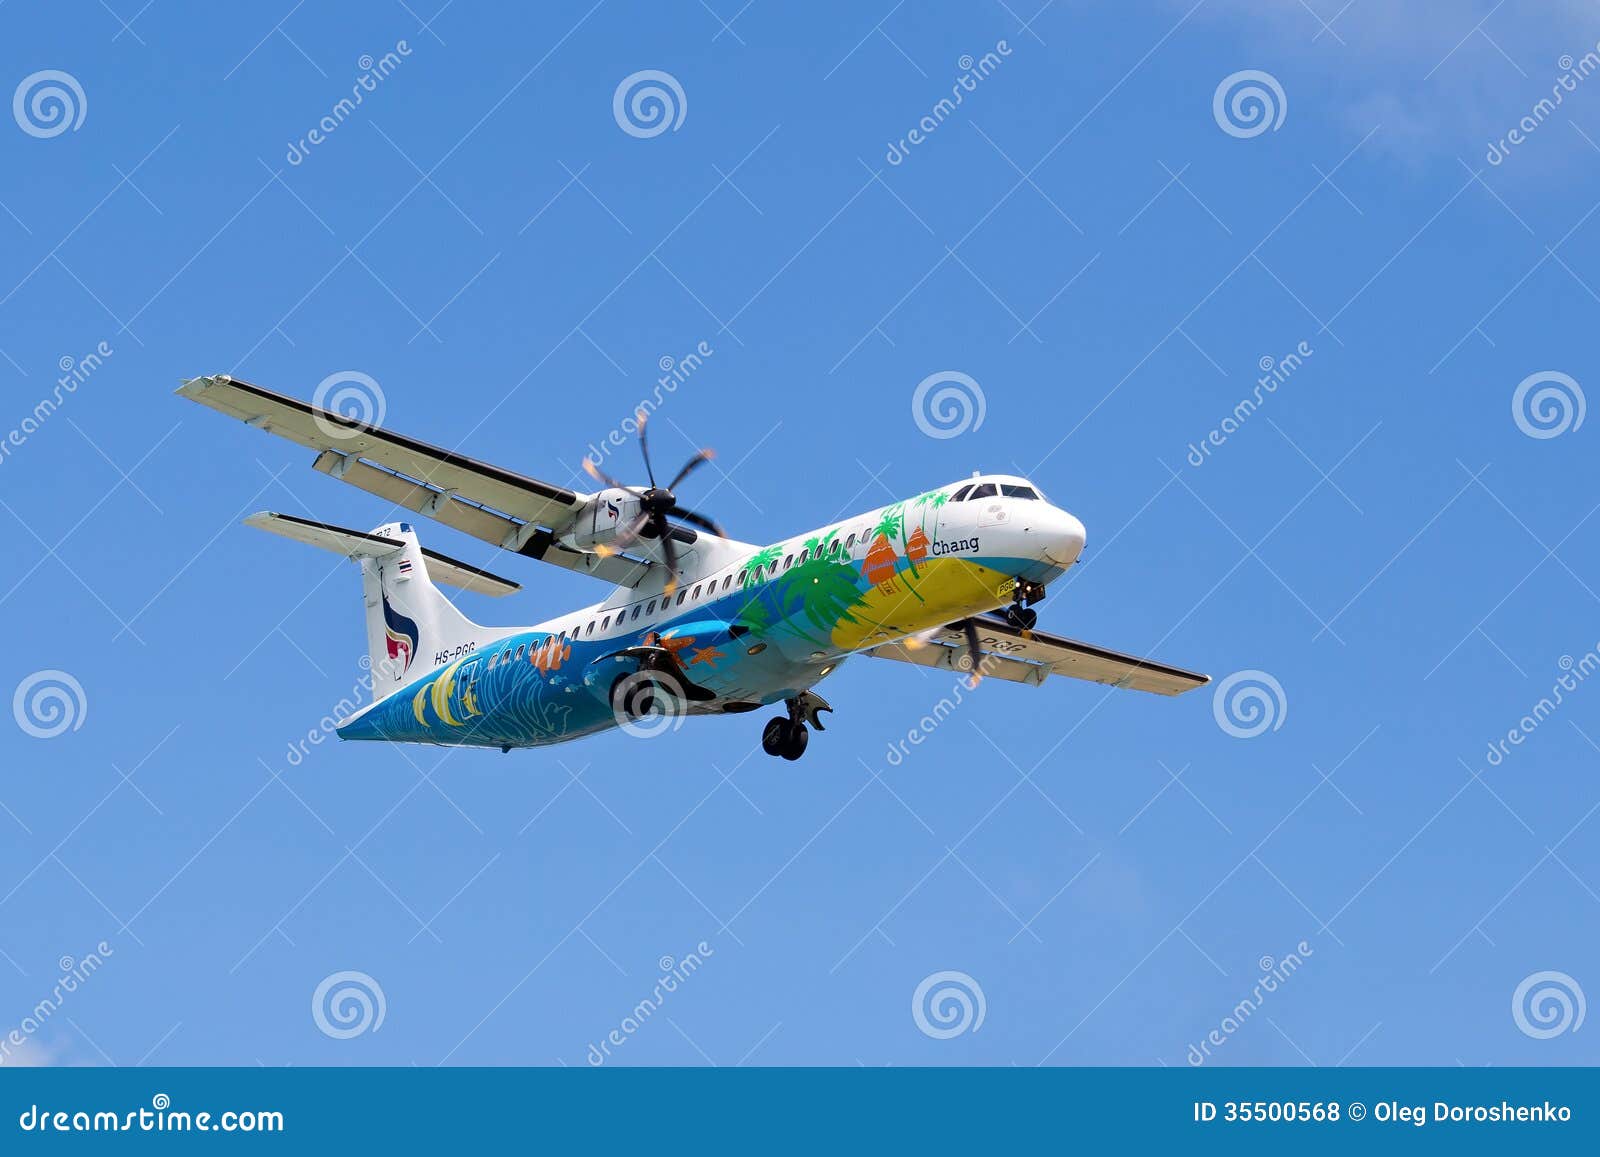 Flying An Airplane Airline Bangkok Airways Over The Island